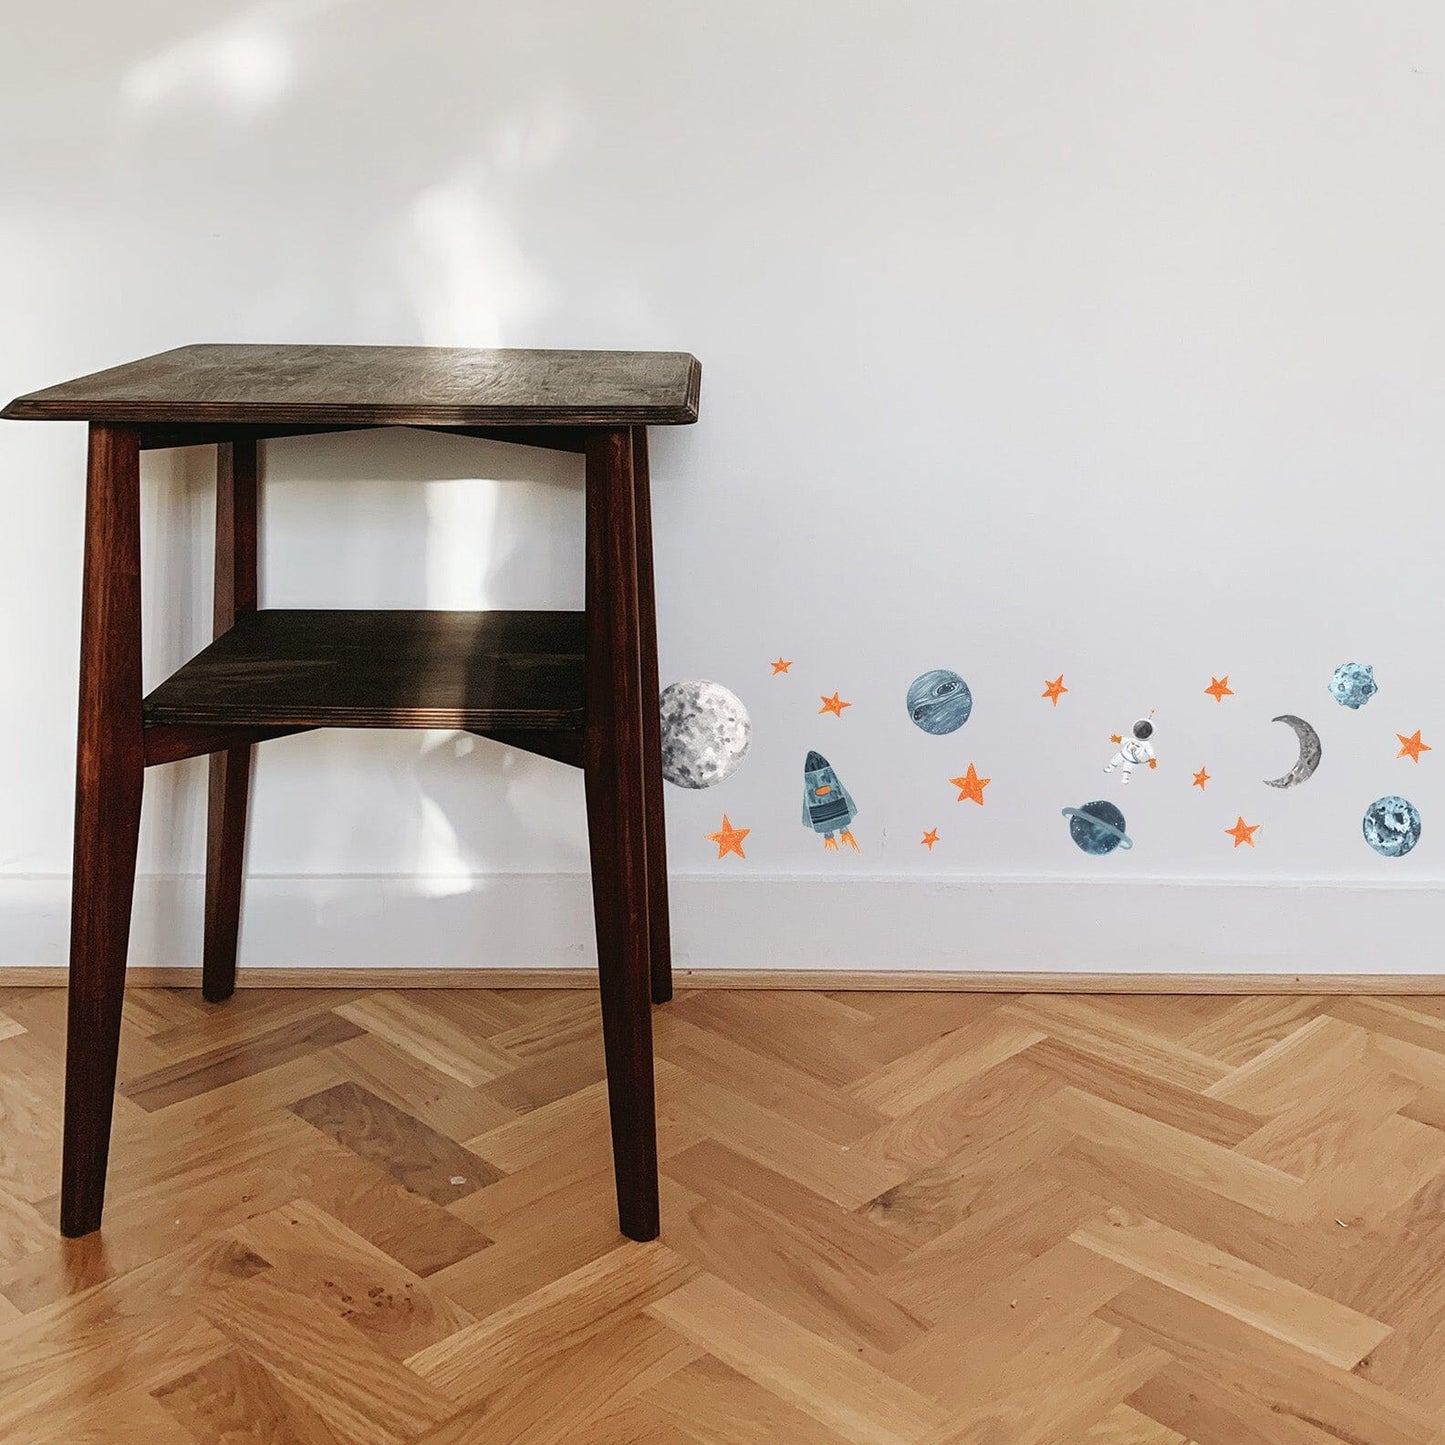 little-space-explorer-pack-wall-decal_little-decal-sets